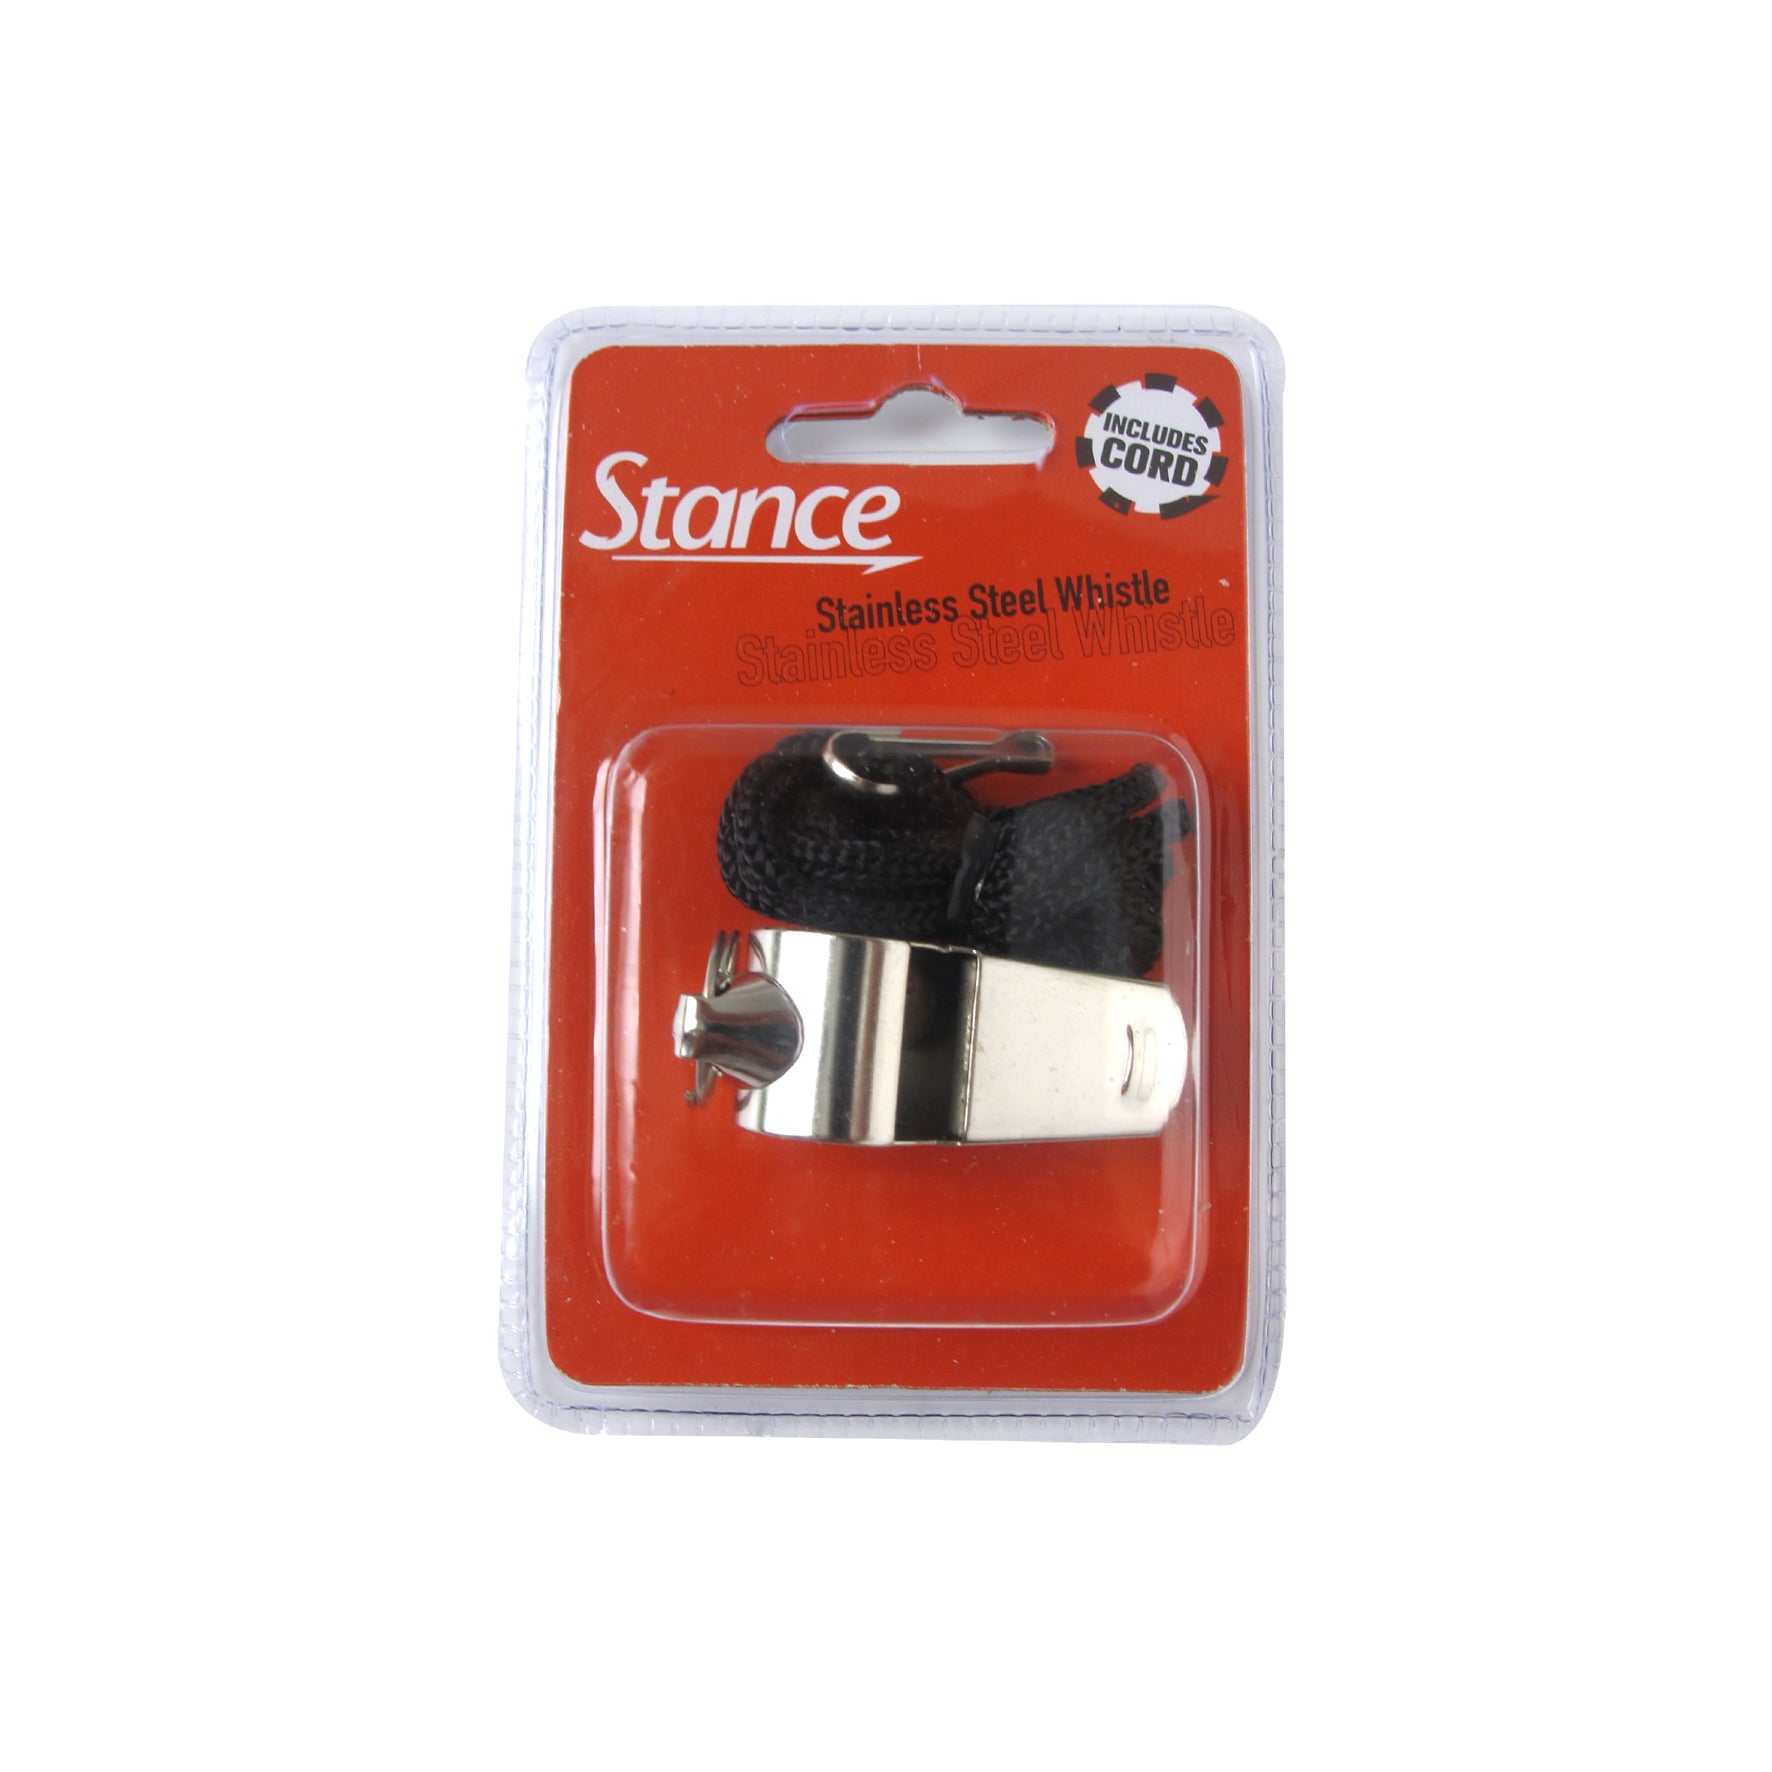 Stainless Steel Whistle with Cord - 1 Piece - Dollars and Sense